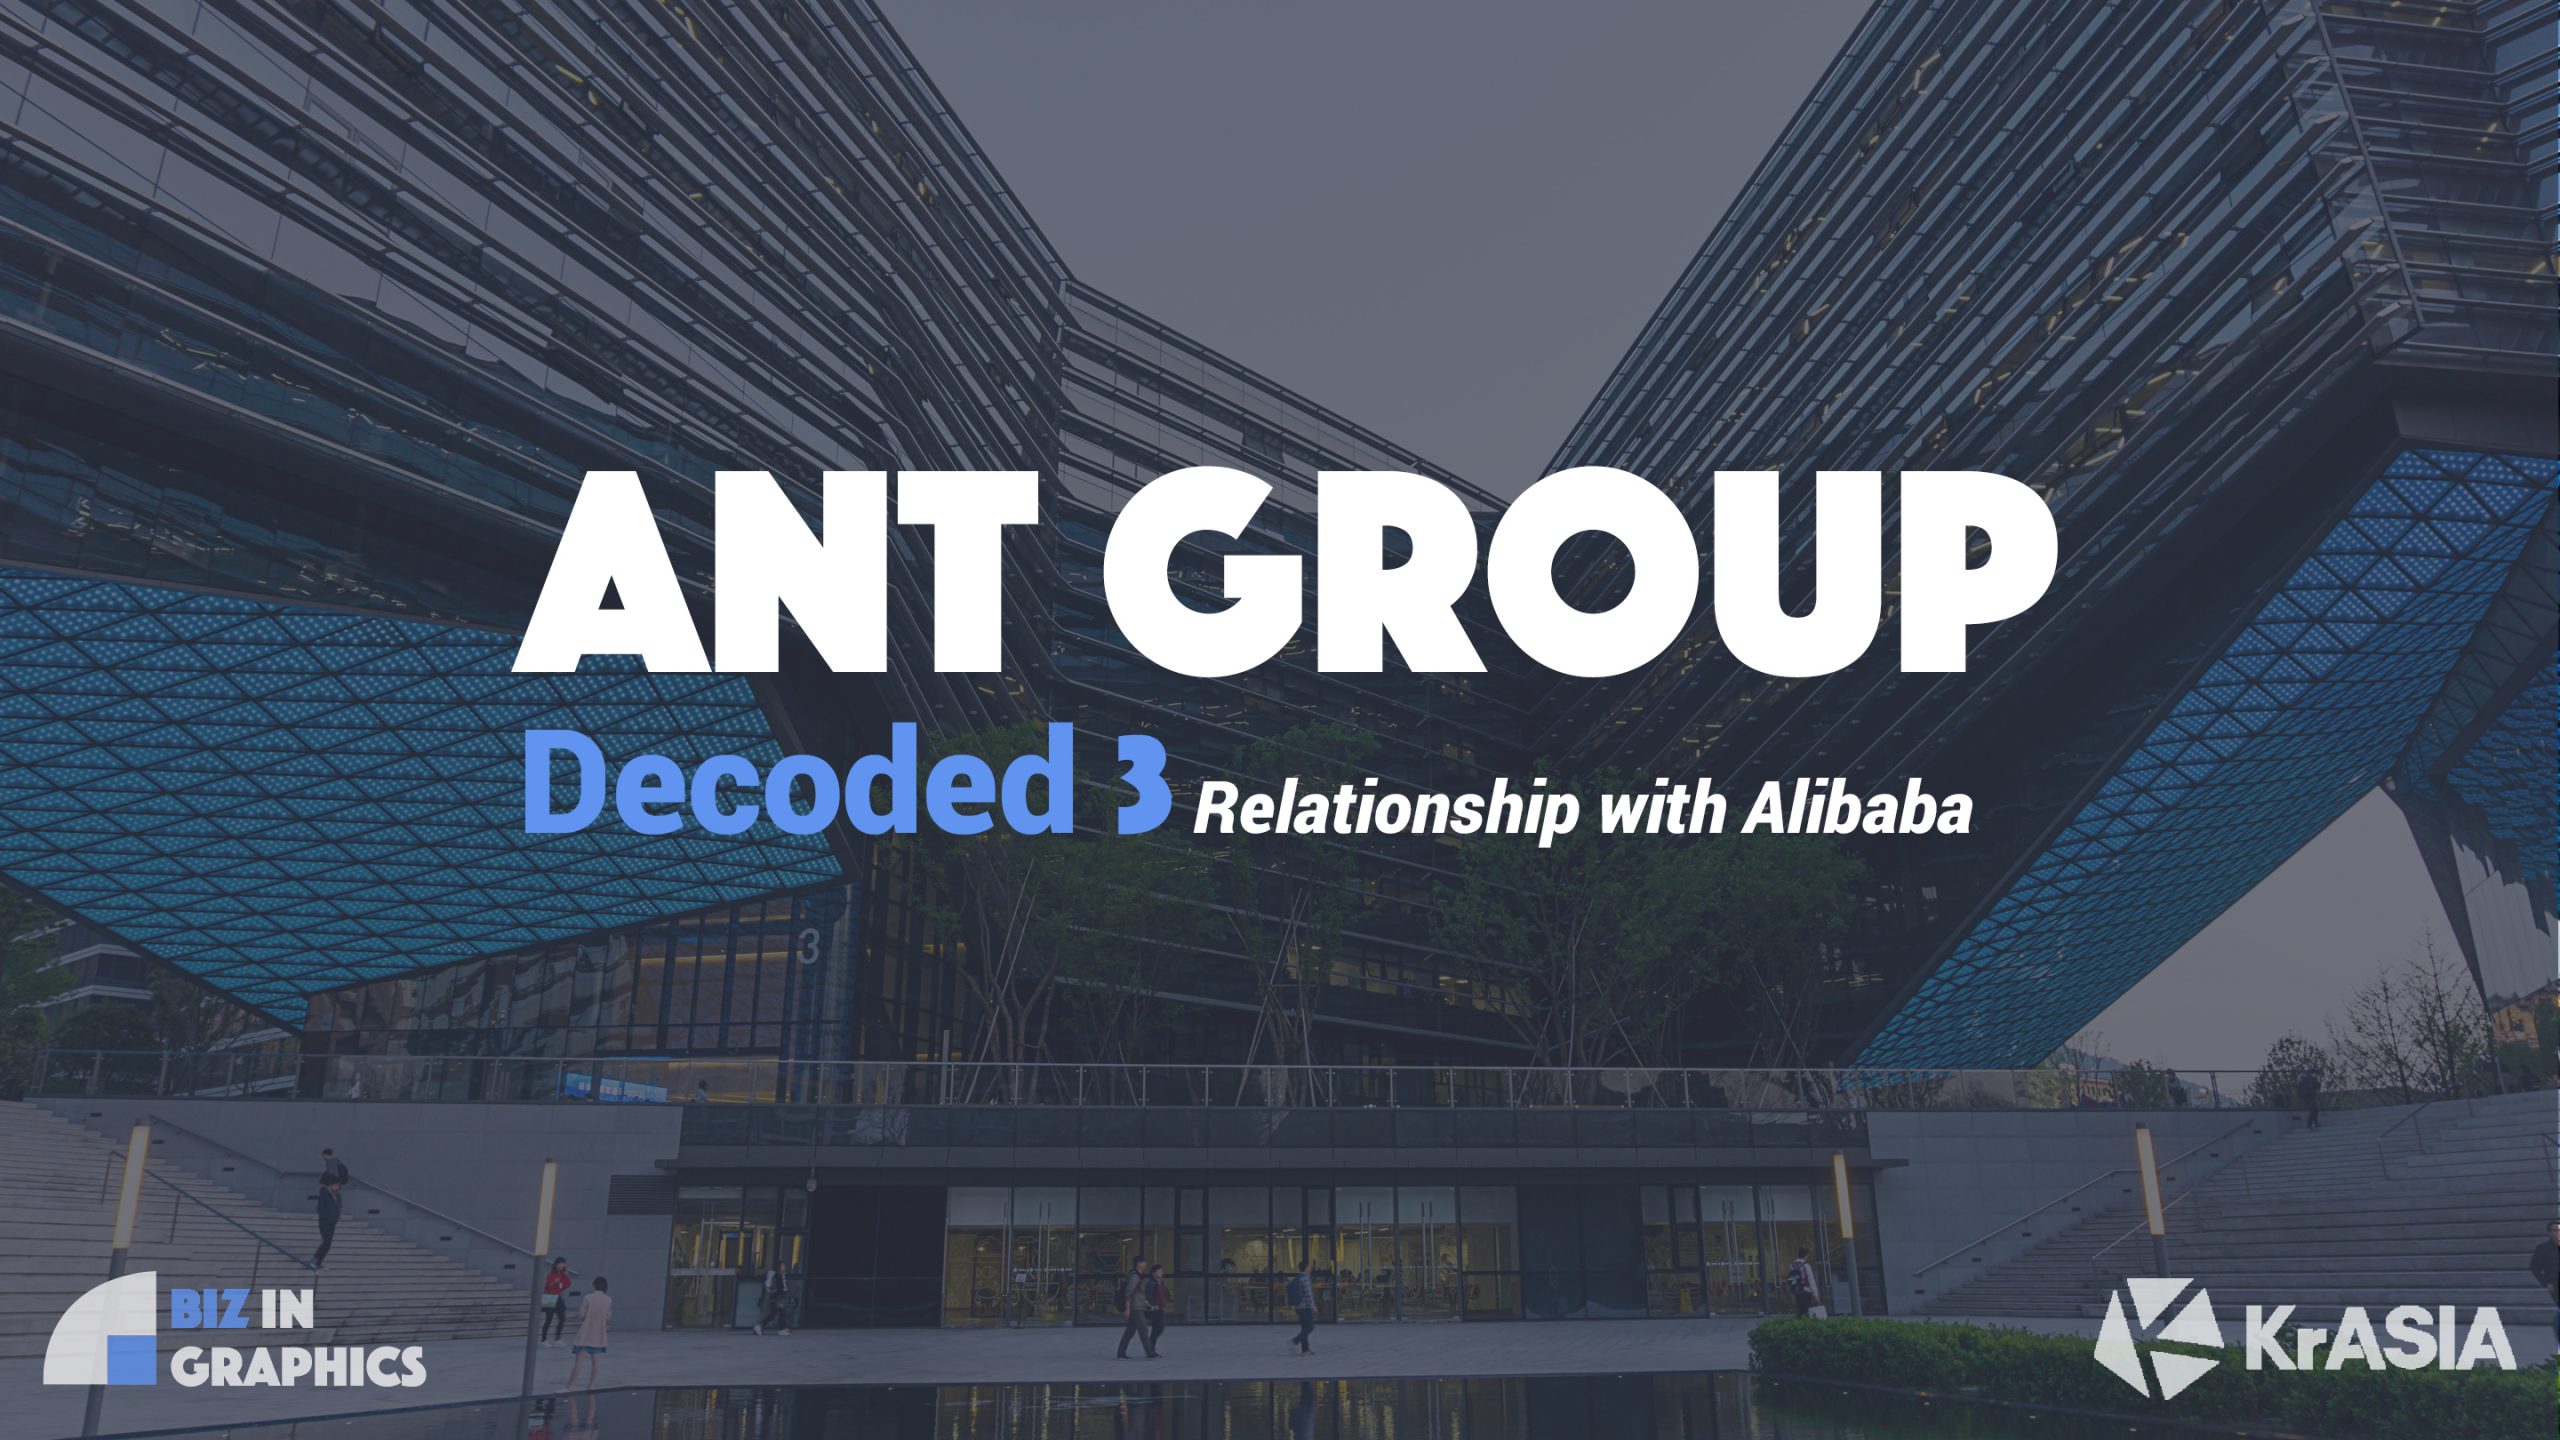 BIZ IN GRAPHICS | Decoding Ant Group’s relationship with Alibaba